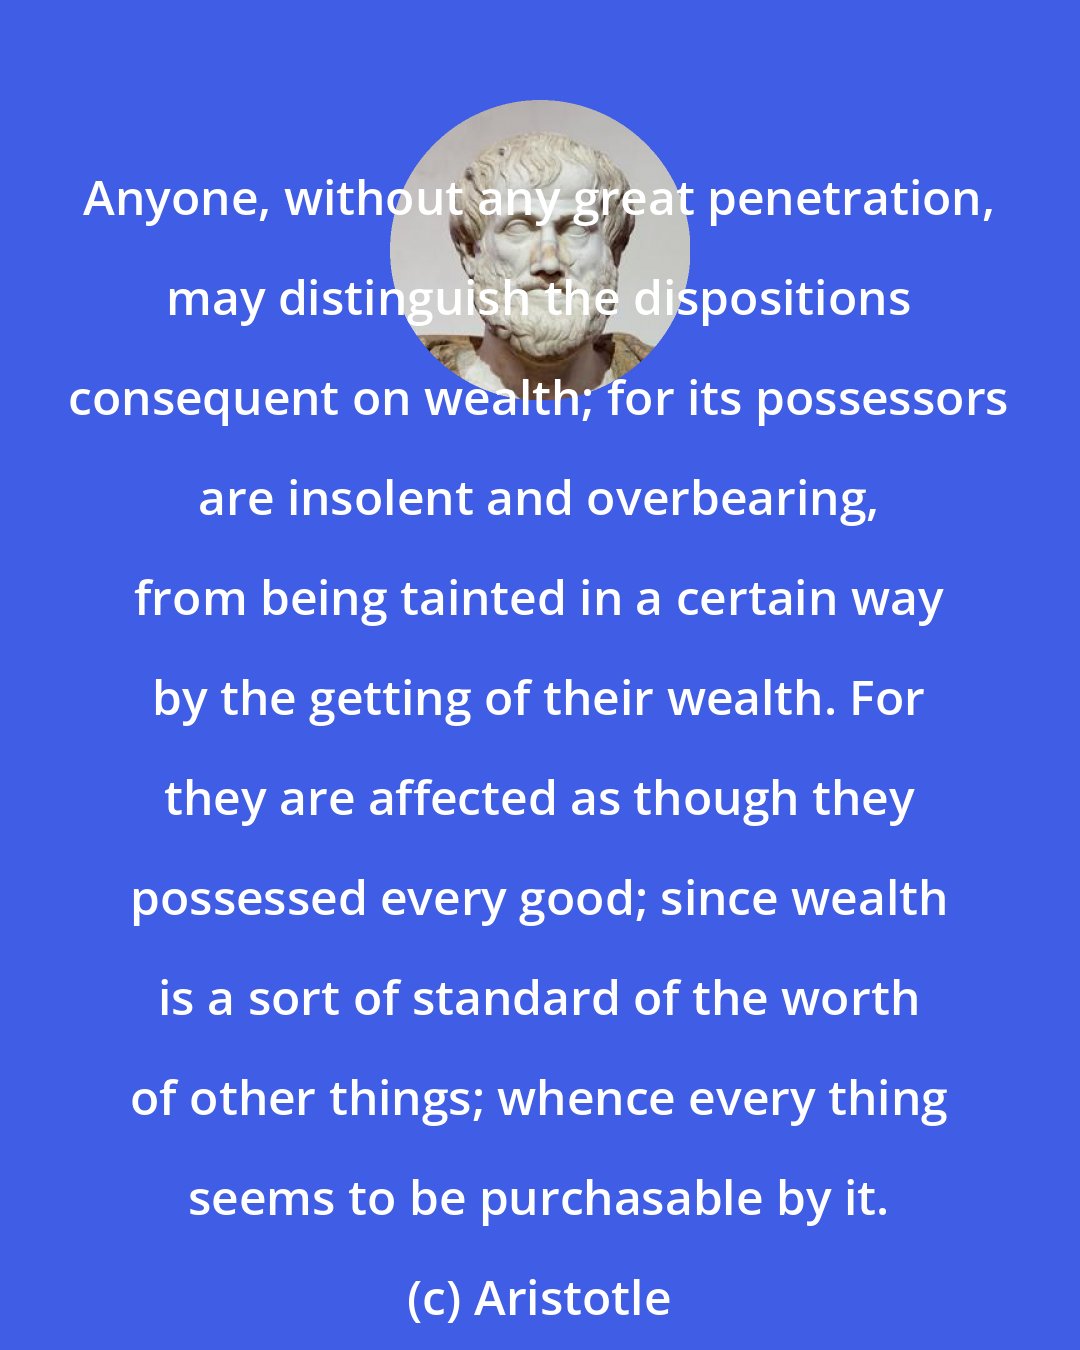 Aristotle: Anyone, without any great penetration, may distinguish the dispositions consequent on wealth; for its possessors are insolent and overbearing, from being tainted in a certain way by the getting of their wealth. For they are affected as though they possessed every good; since wealth is a sort of standard of the worth of other things; whence every thing seems to be purchasable by it.